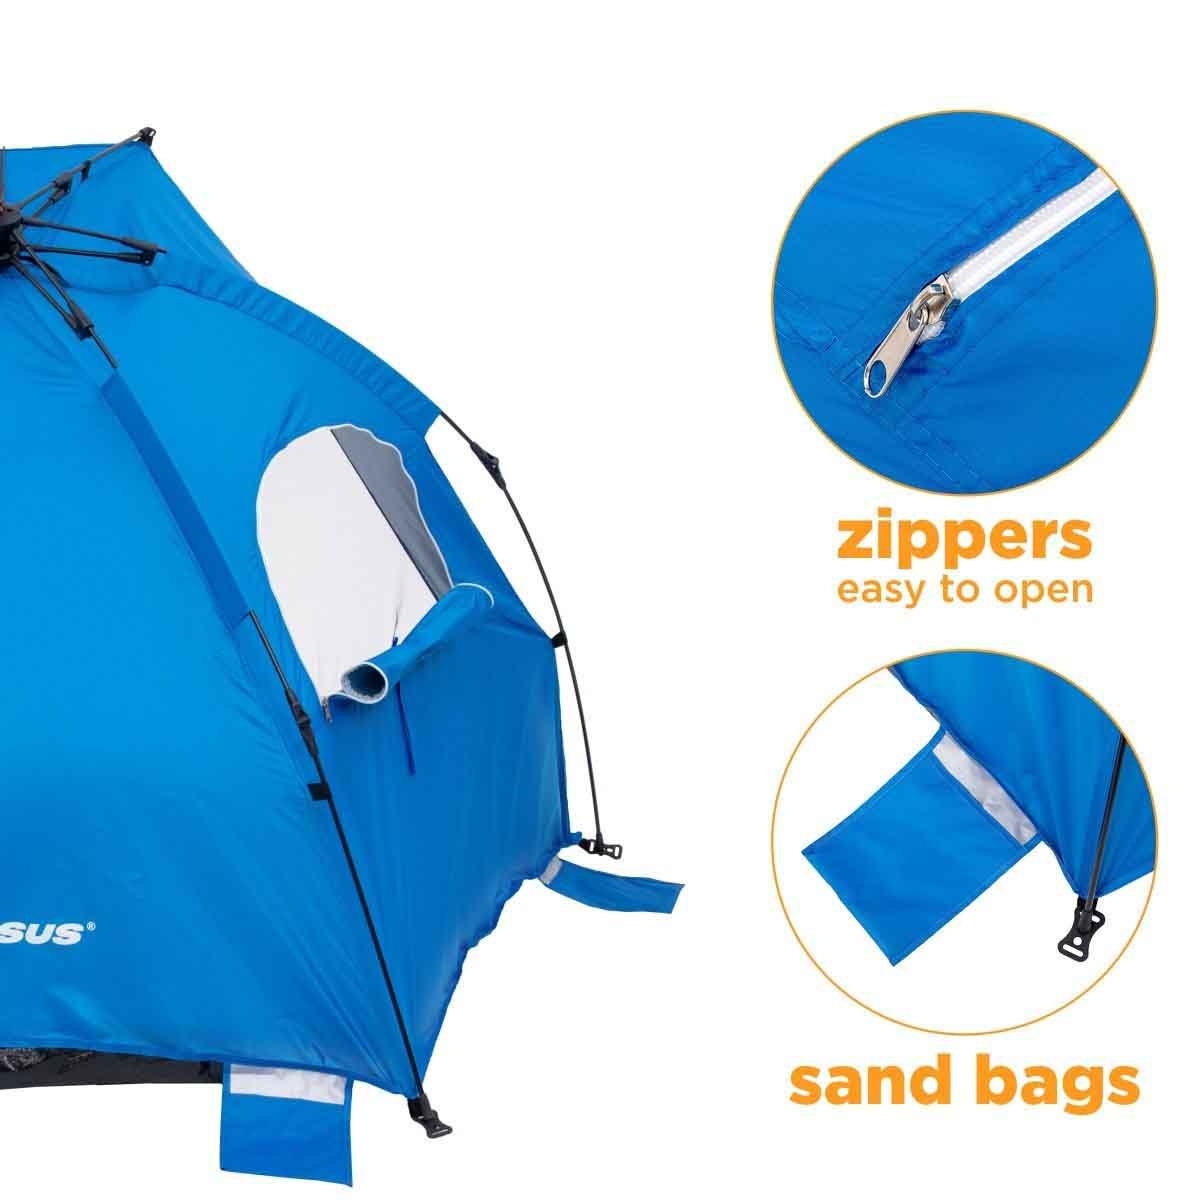 2 Person Easy Up Beach Tent Sun Shade Shelter UPF 50+ is equipped with sand bags and is easily opened with zipper locks